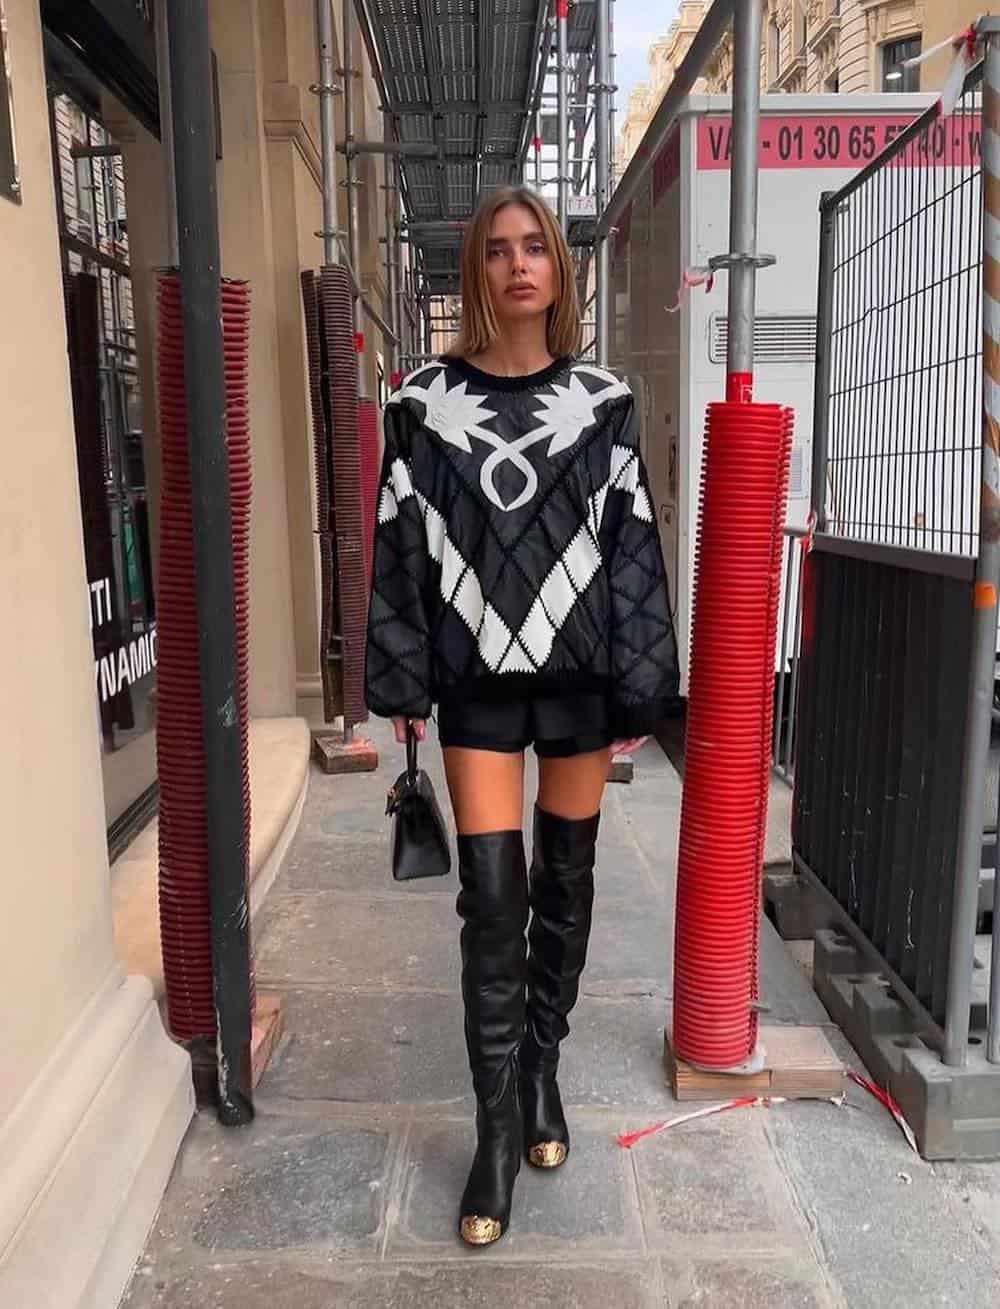 Woman wearing a black and white western style long sleeve shirt with black shorts and black over the knee boots.